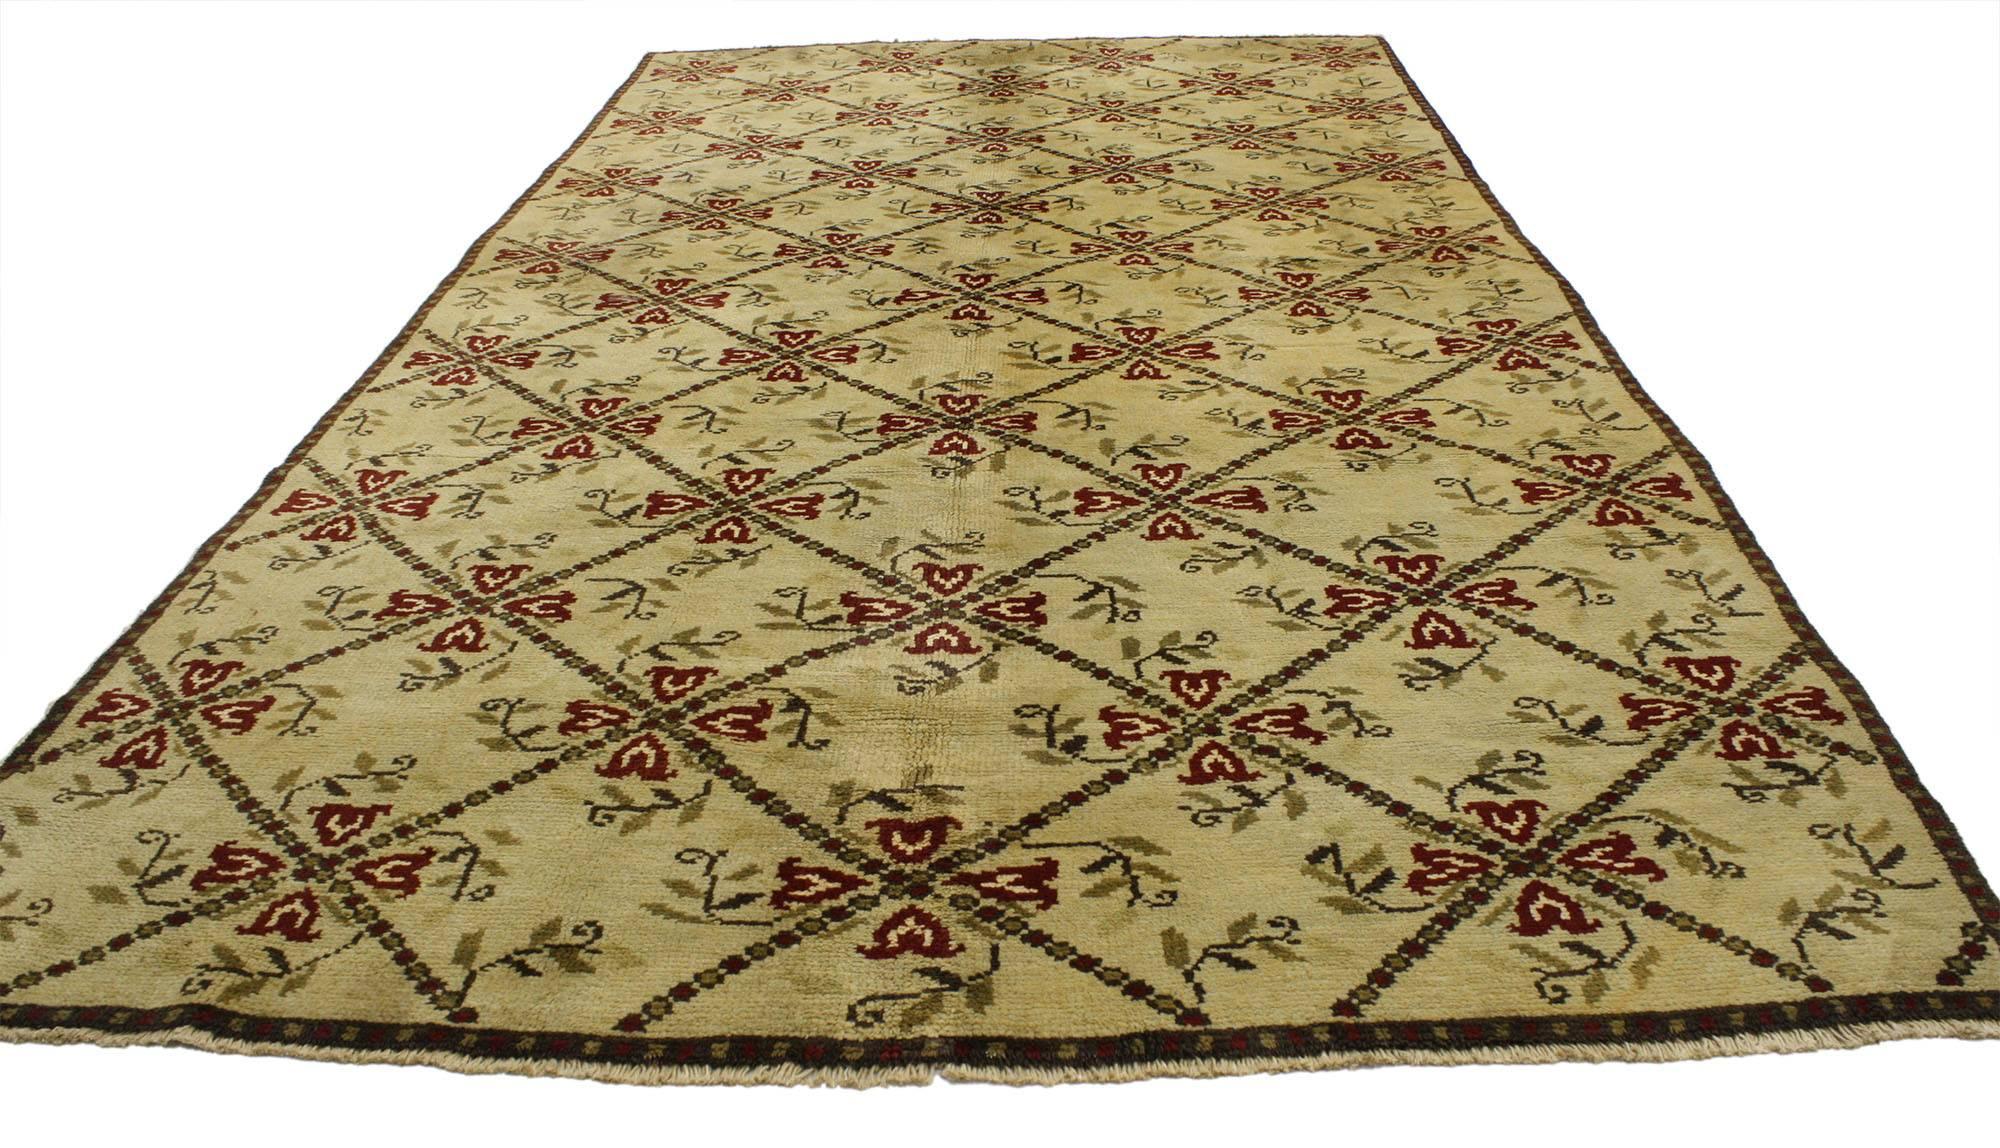 52144, vintage Turkish Oushak gallery rug, wide hallway runner. This hand-knotted wool vintage Turkish Oushak gallery rug features an all-over floral lattice motif on an abrashed beige field. A simple gridded border frames the design, repeating the